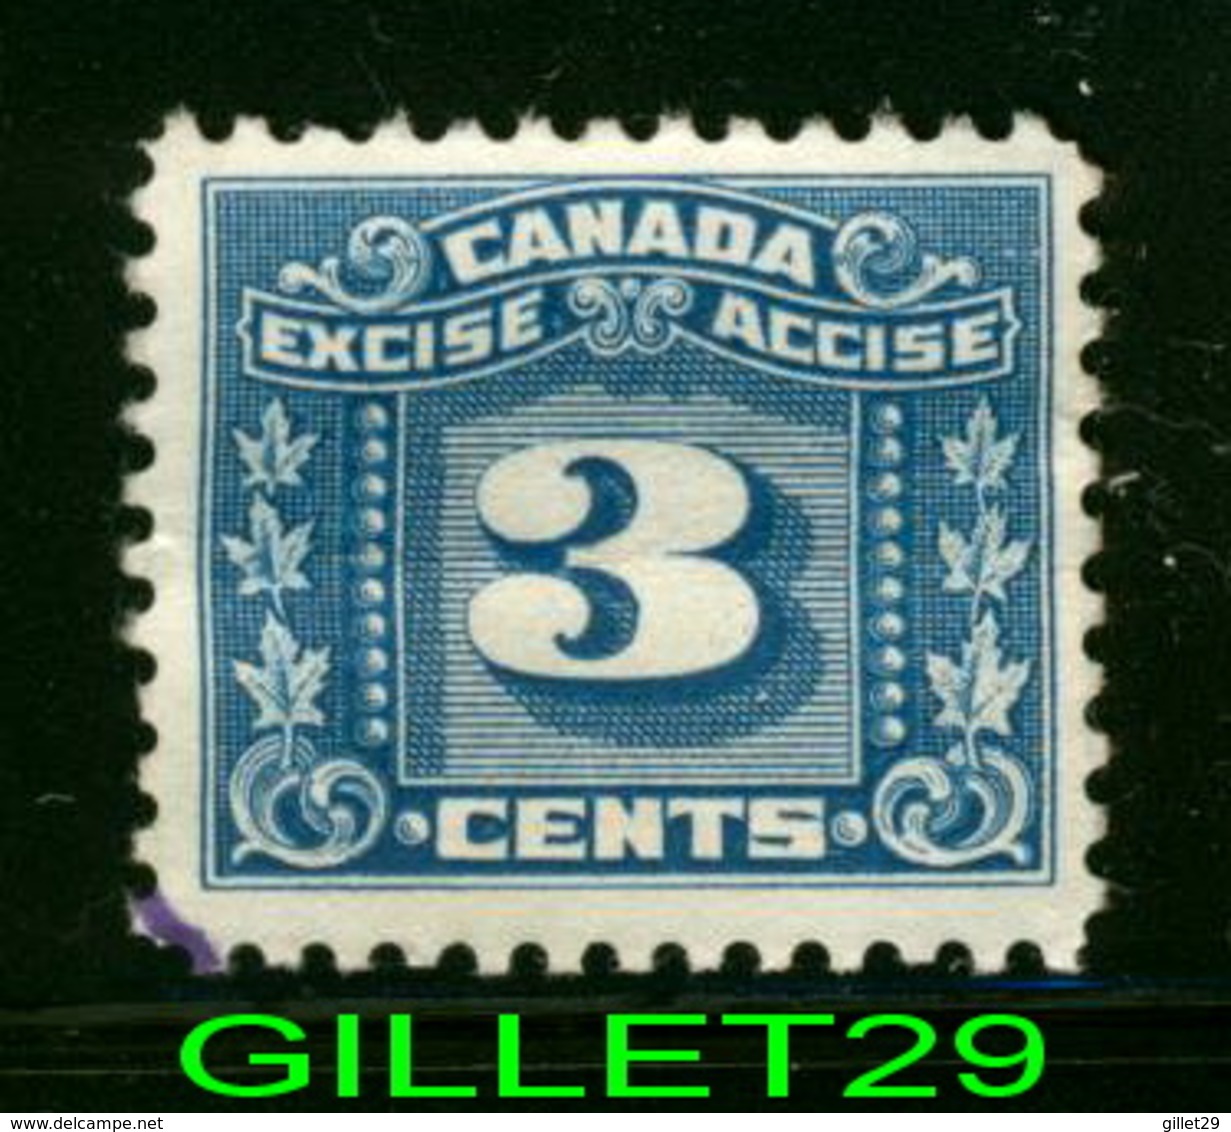 STAMPS - 3 Cents EXCISE ACCISE Revenue Fiscal Tax Postage Due Official Canada - - Portomarken